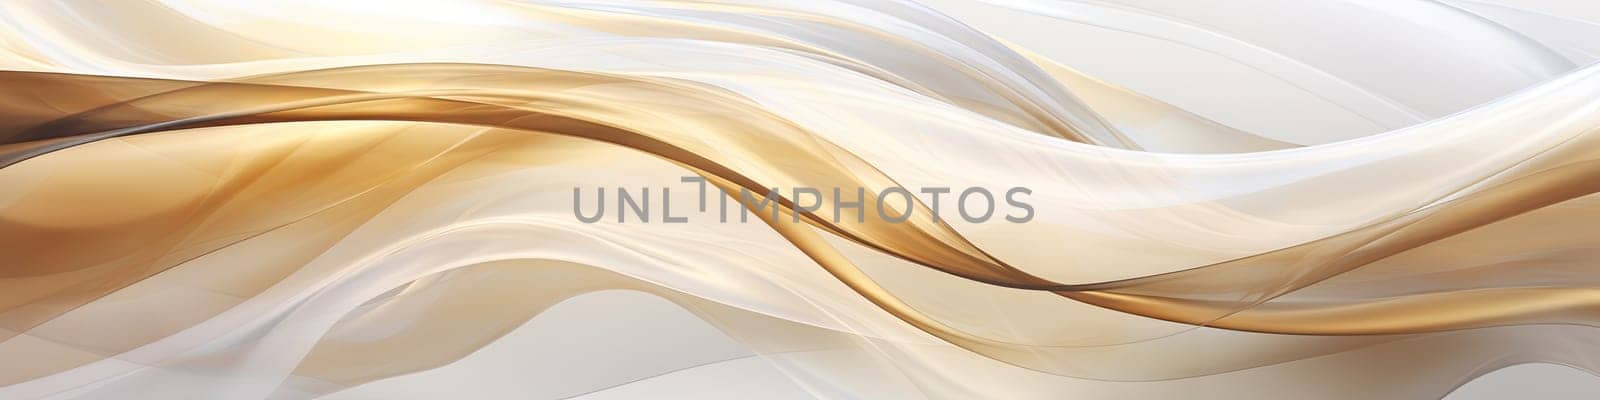 Banner of abstract white and brown, gold textile transparent fabric as background or texture